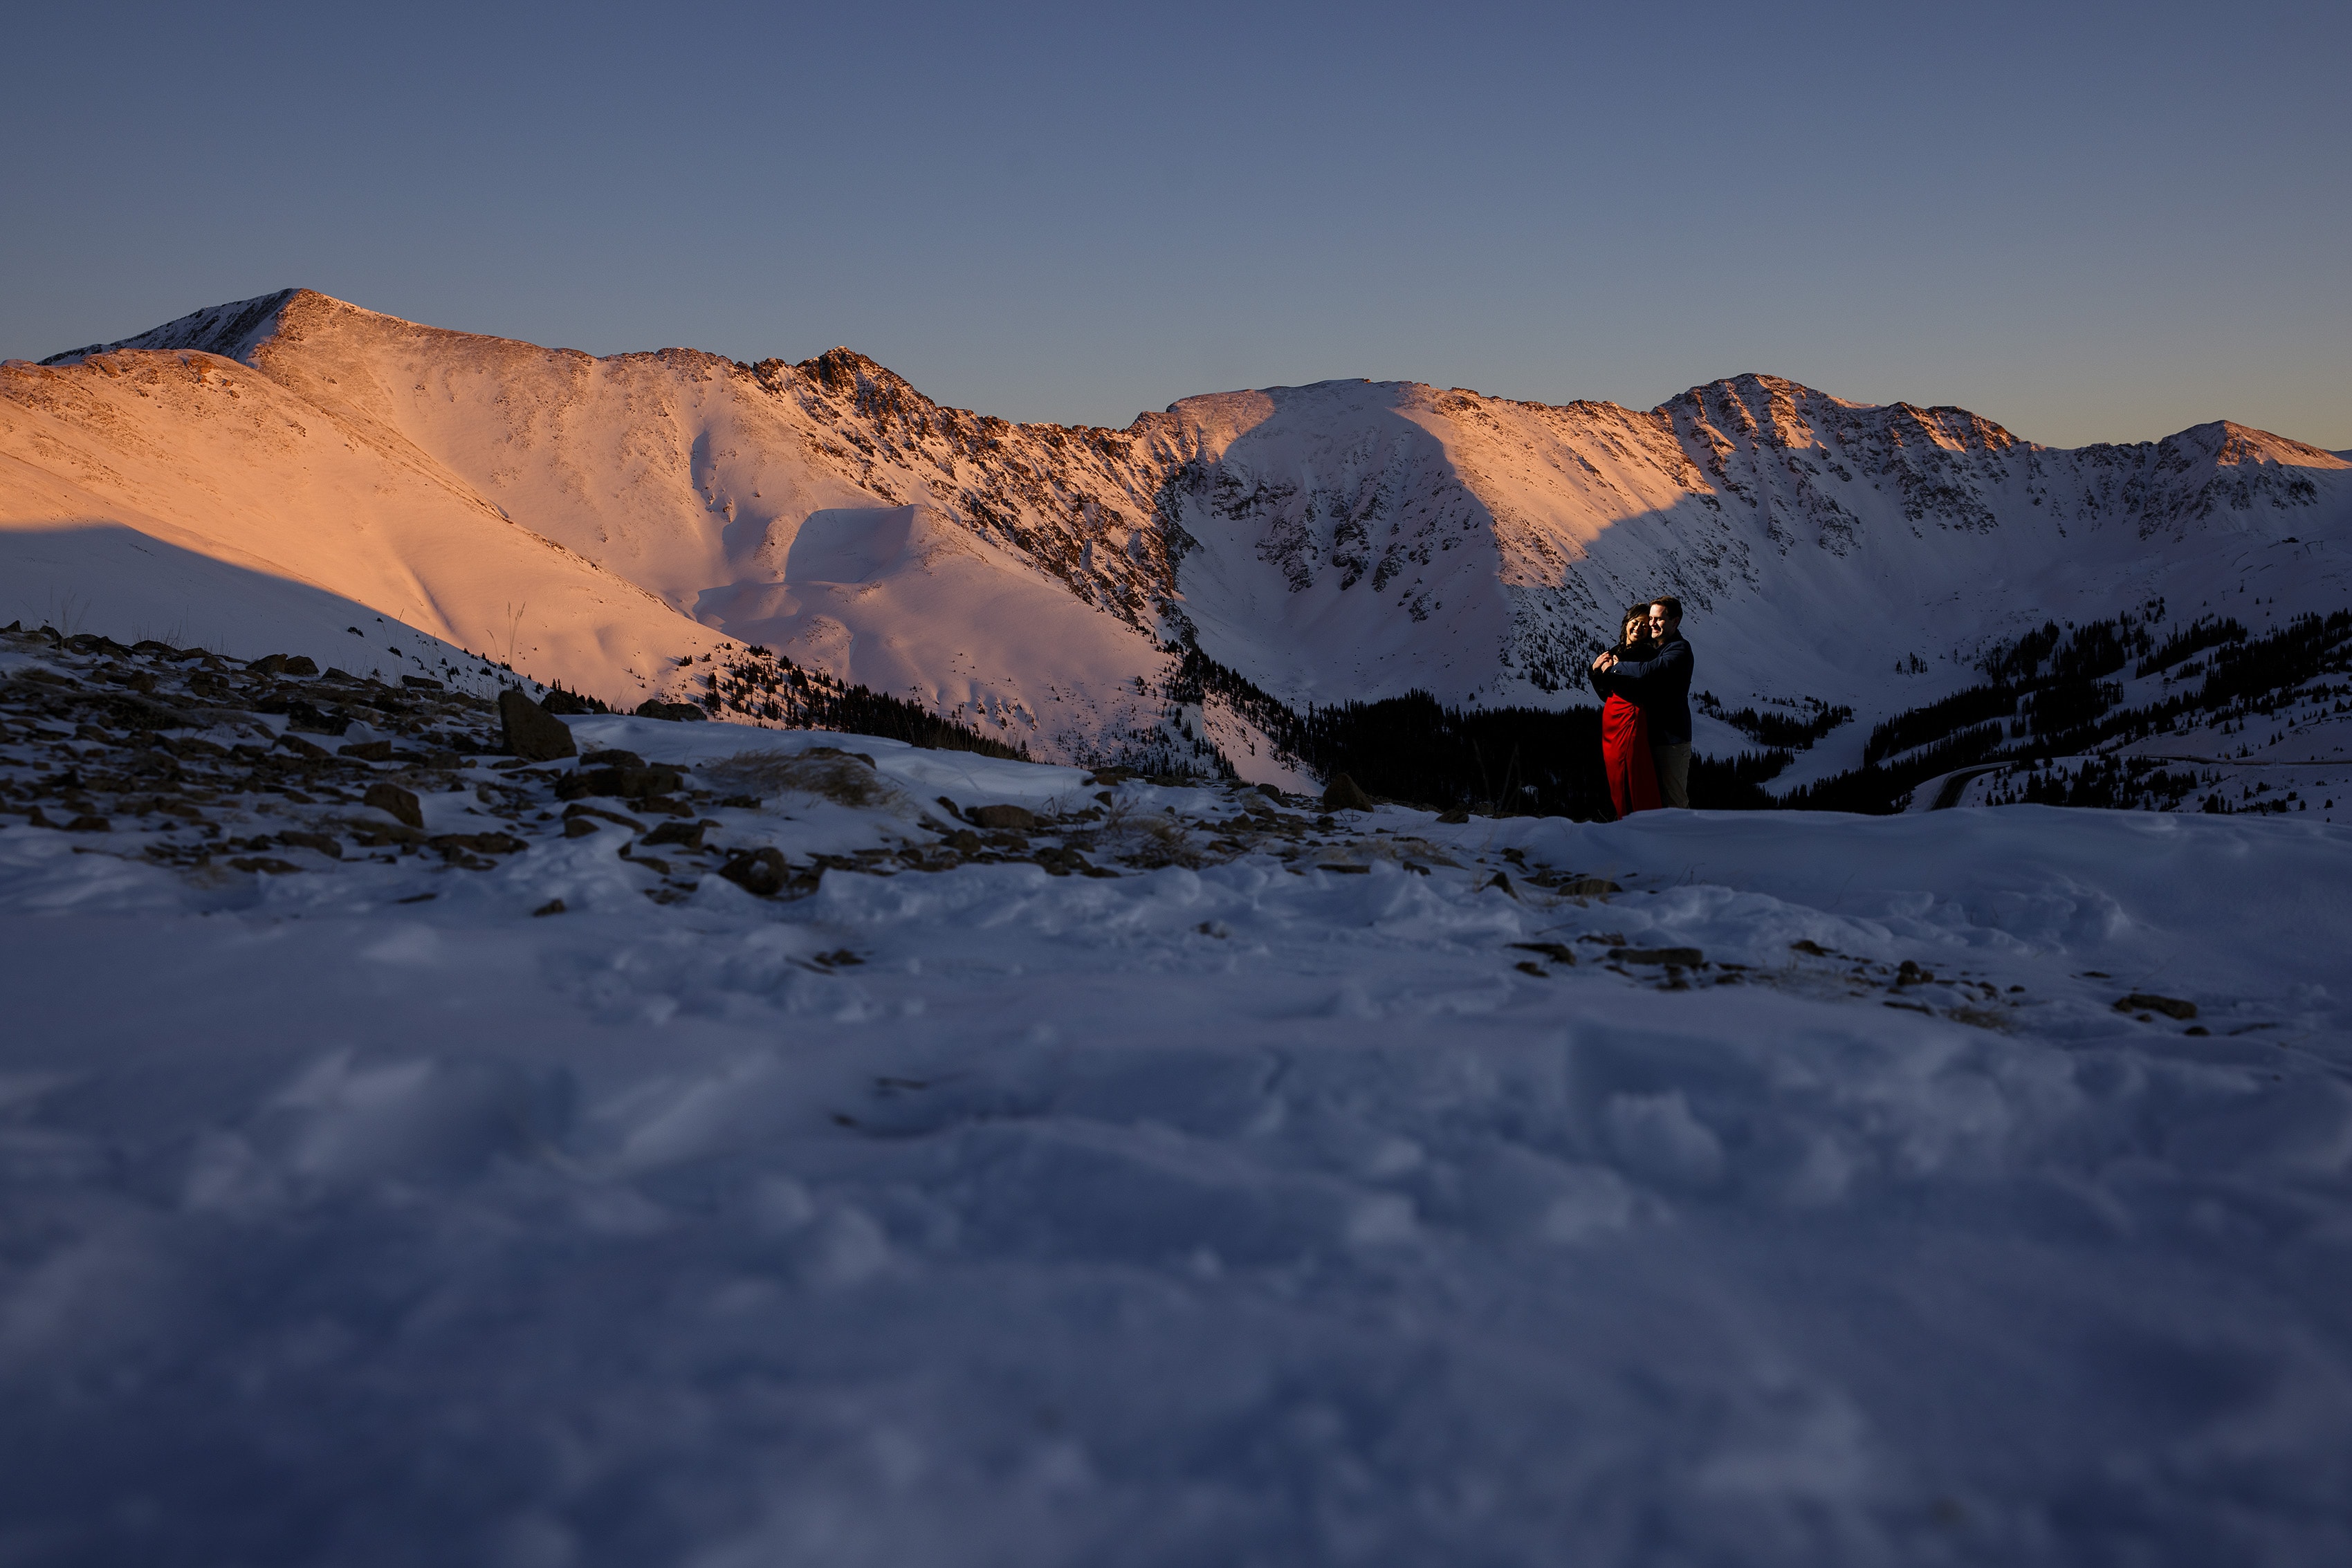 Nicole and Brett embrace as alpenglow illuminates the East Wall of Arapahoe Basin ski area as seen from Loveland Pass in Colorado